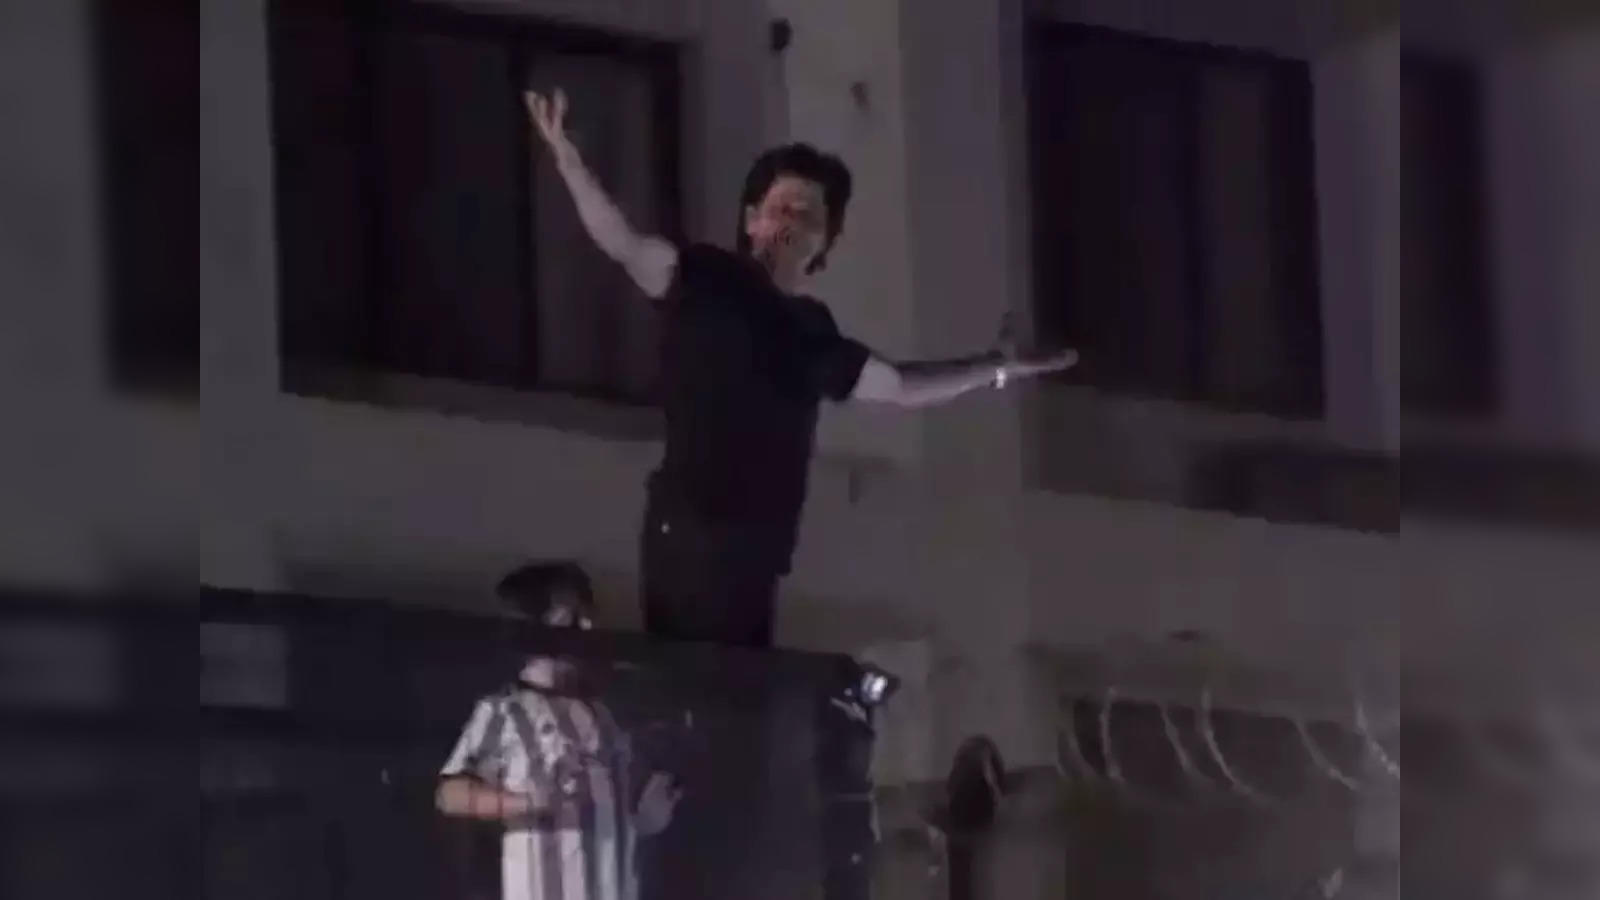 Shah Rukh Khan waves to his fans outside 'Mannat' to celebrate the world TV  premiere of his film 'Pathaan' [watch] - IBTimes India